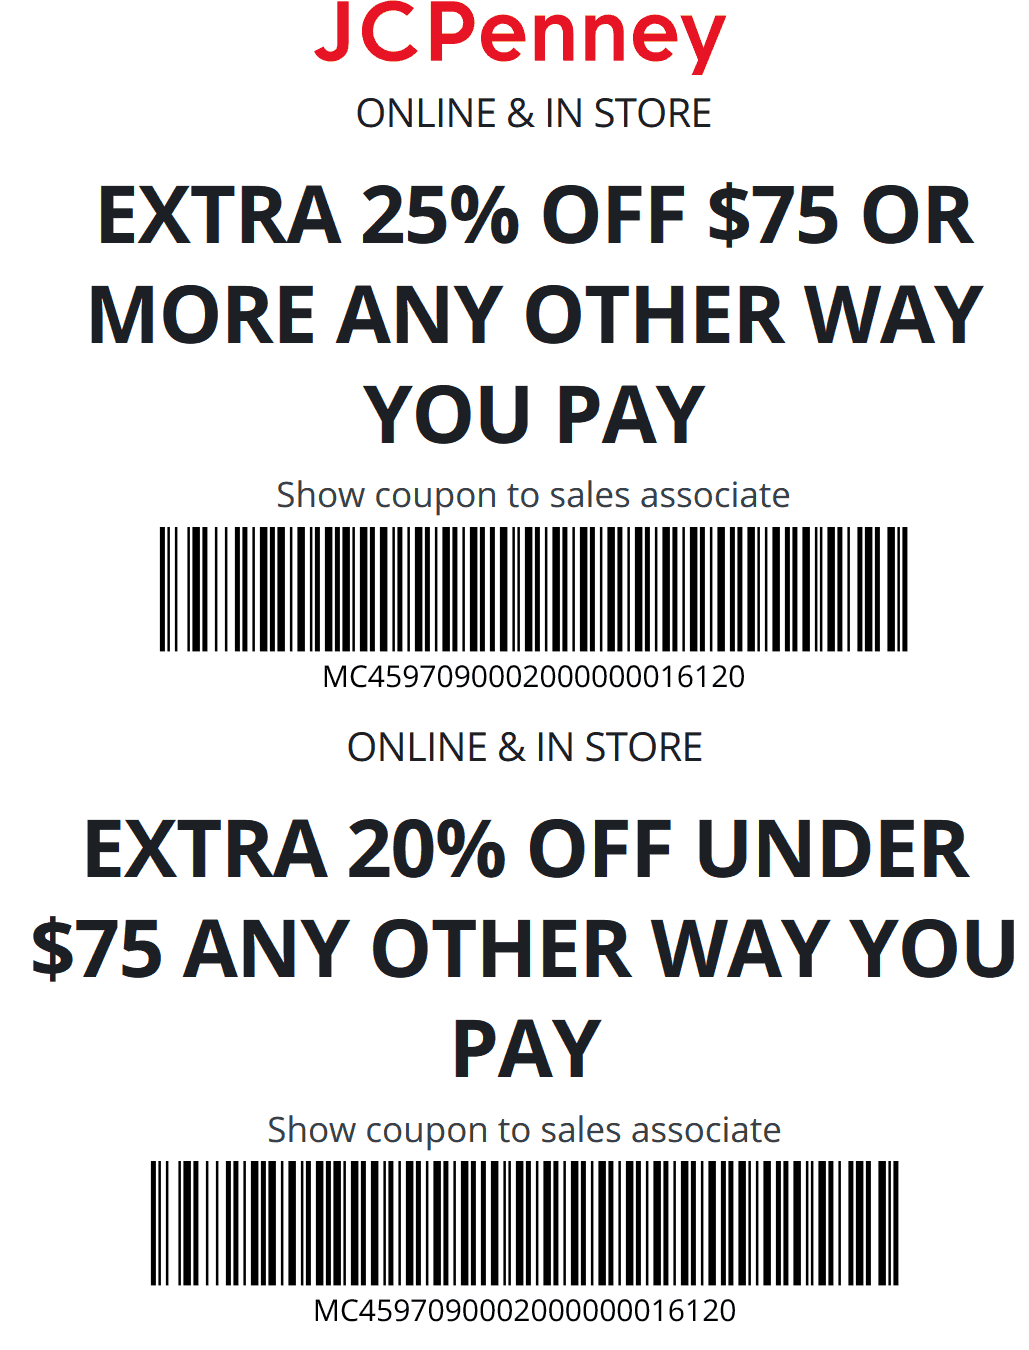 JCPenney stores Coupon  20-25% off at JCPenney, or online via promo code SUNFUN20 #jcpenney